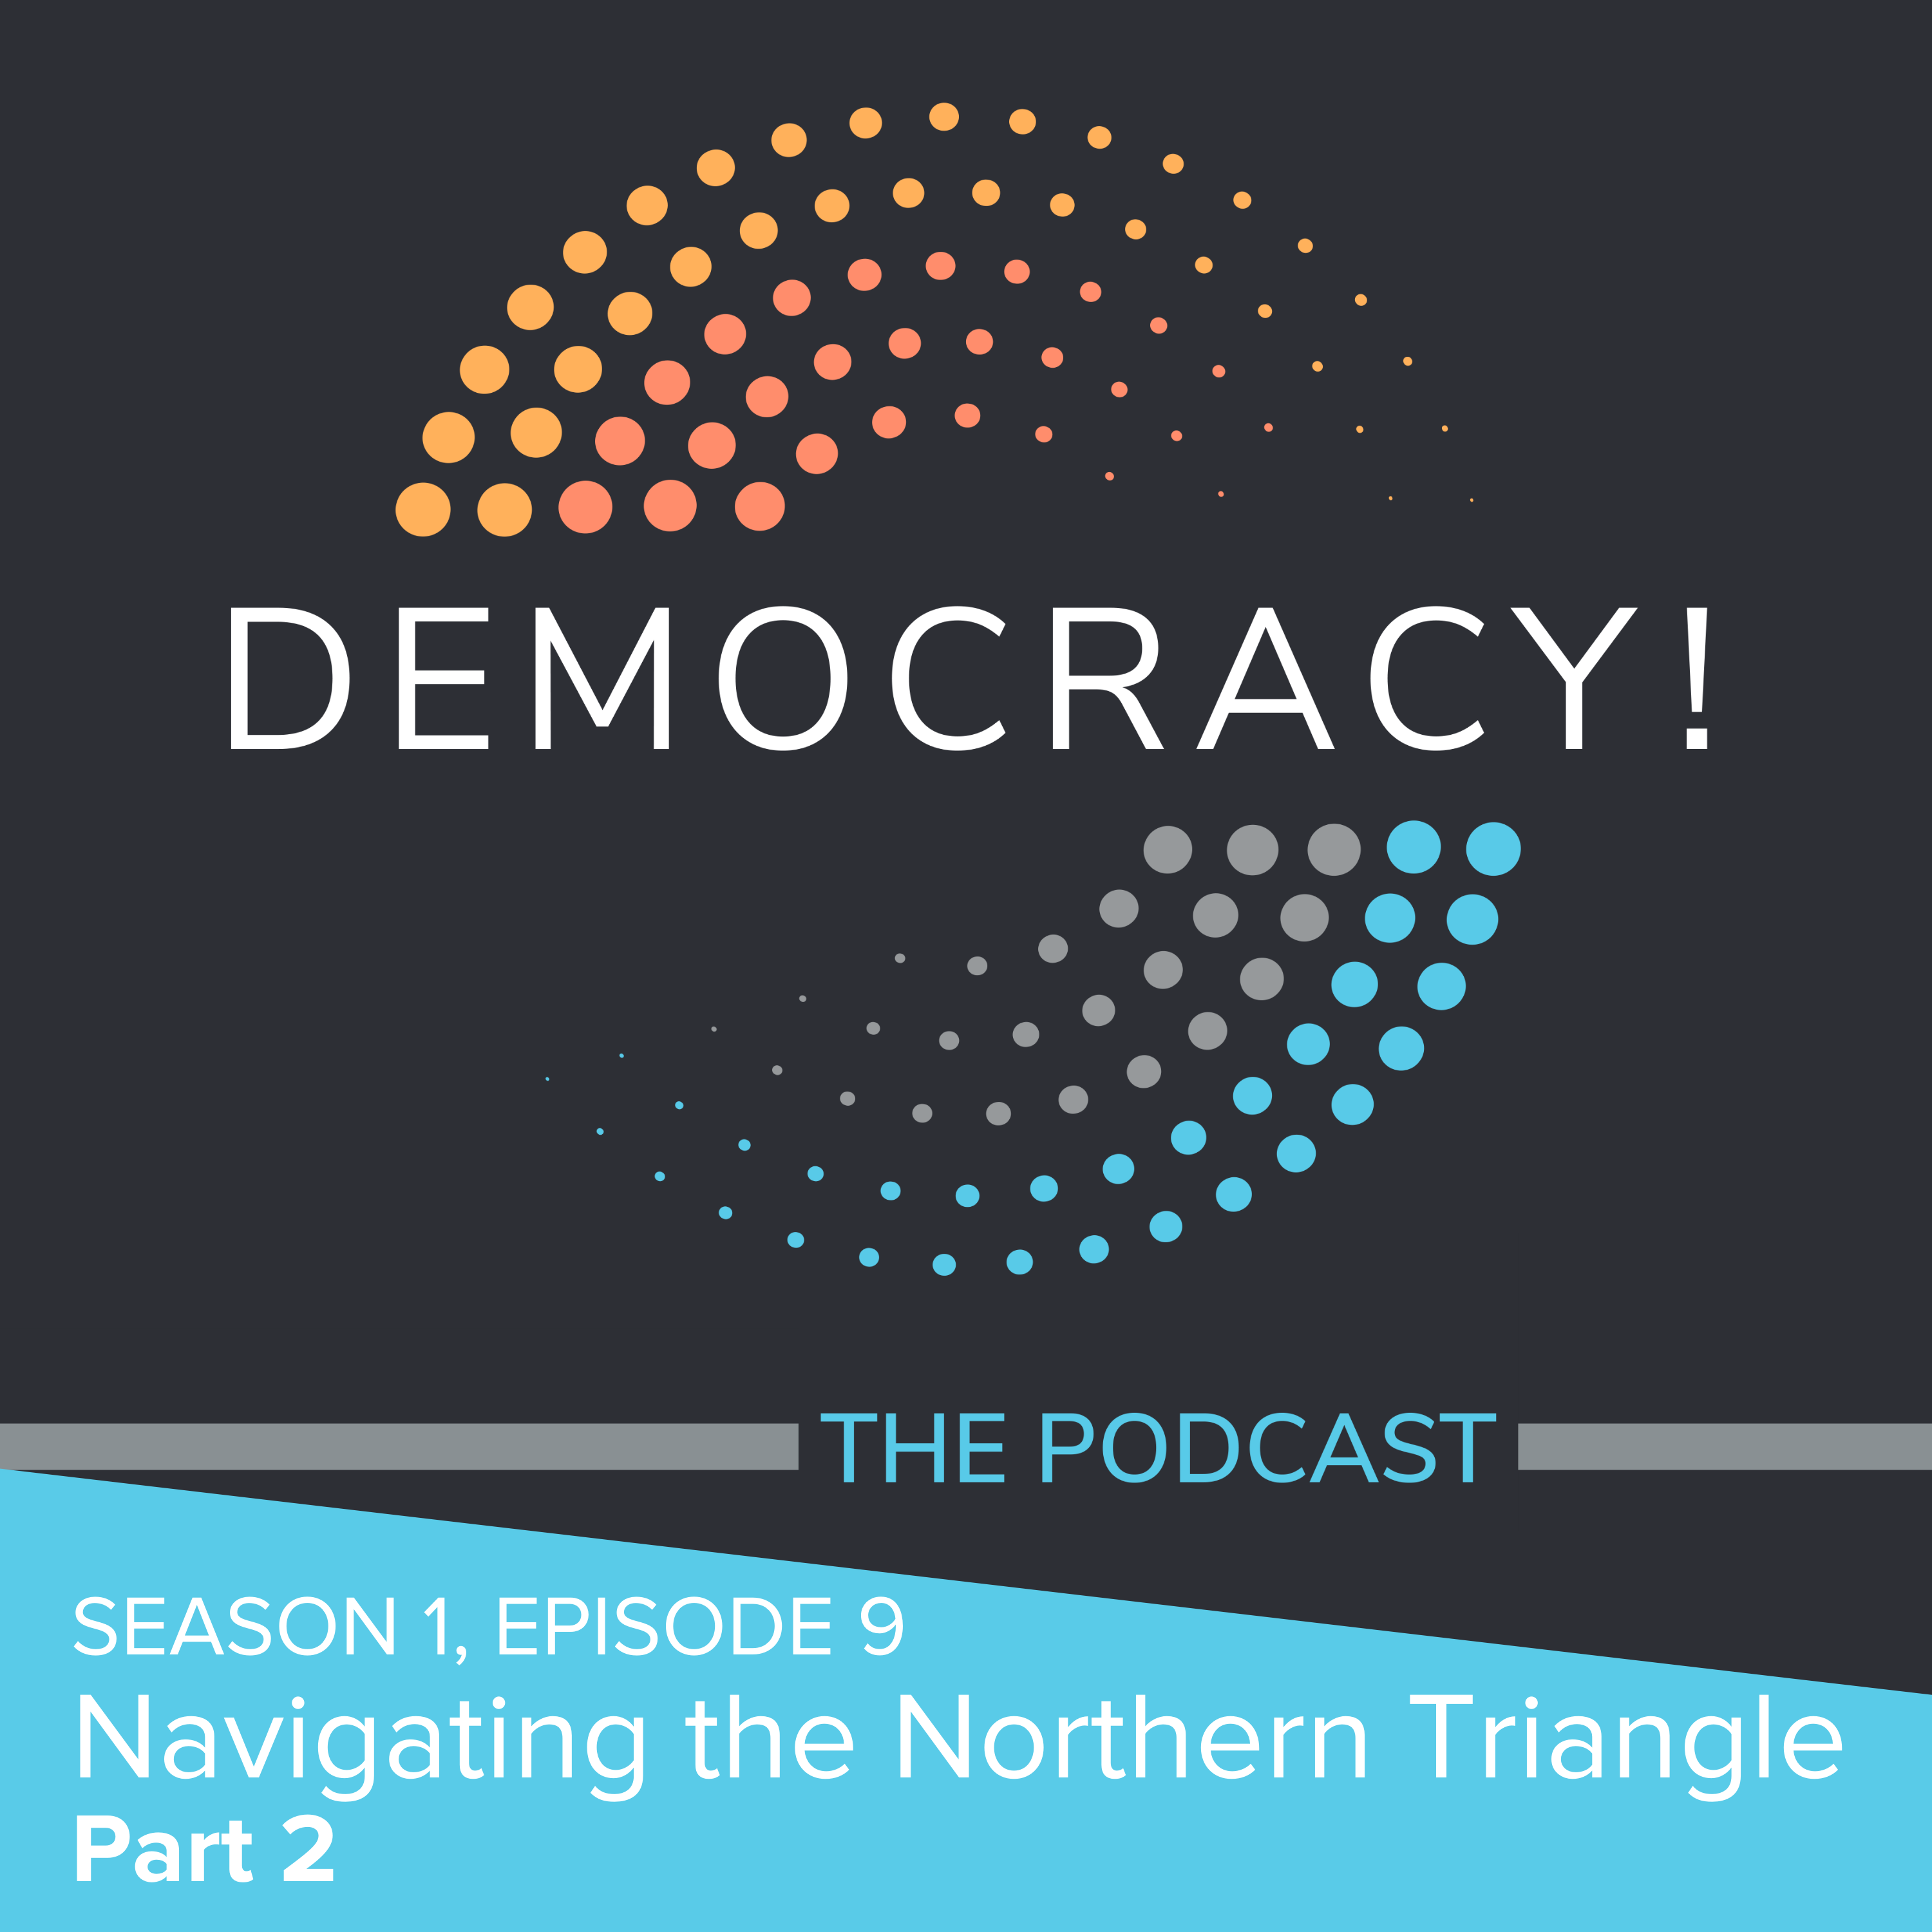 Artwork for podcast Democracy! The Podcast